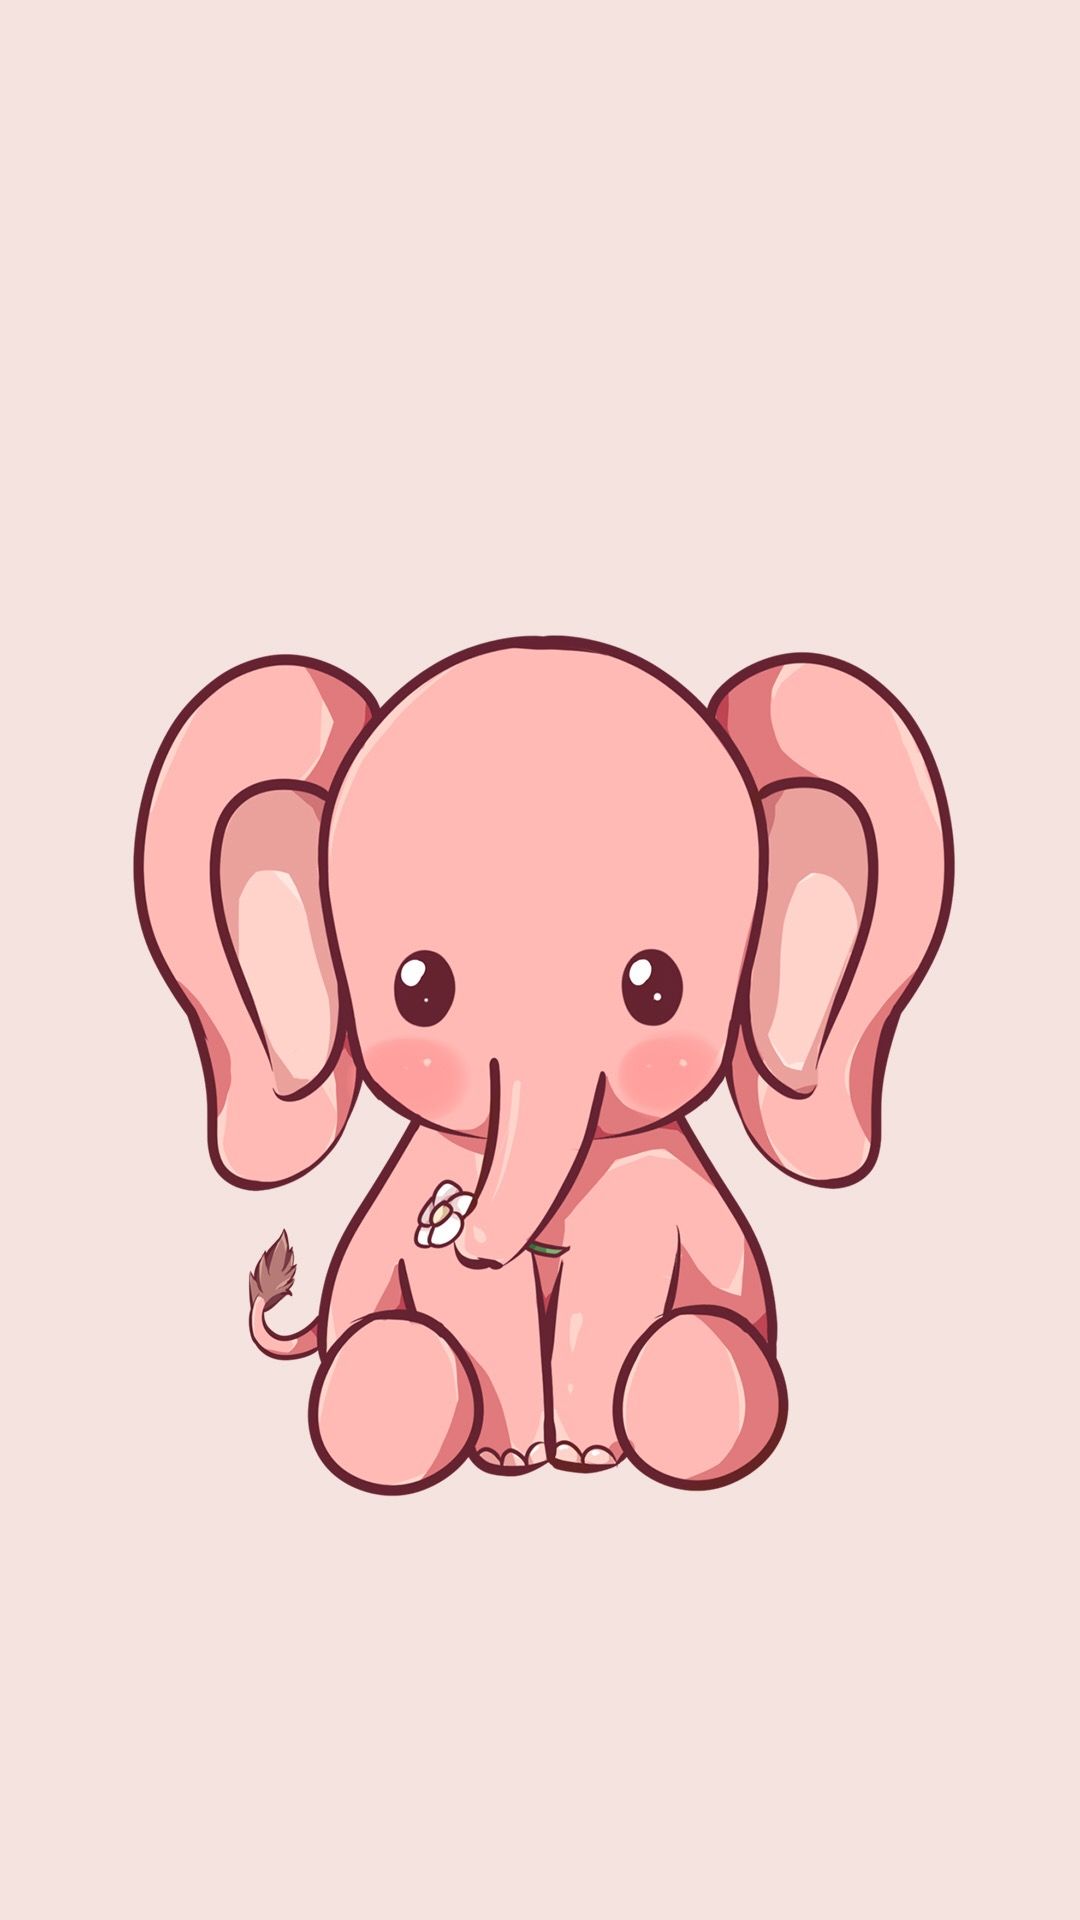 Cute pink elephant wallpaper for iPhone with high-resolution 1080x1920 pixel. You can use this wallpaper for your iPhone 5, 6, 7, 8, X, XS, XR backgrounds, Mobile Screensaver, or iPad Lock Screen - Elephant